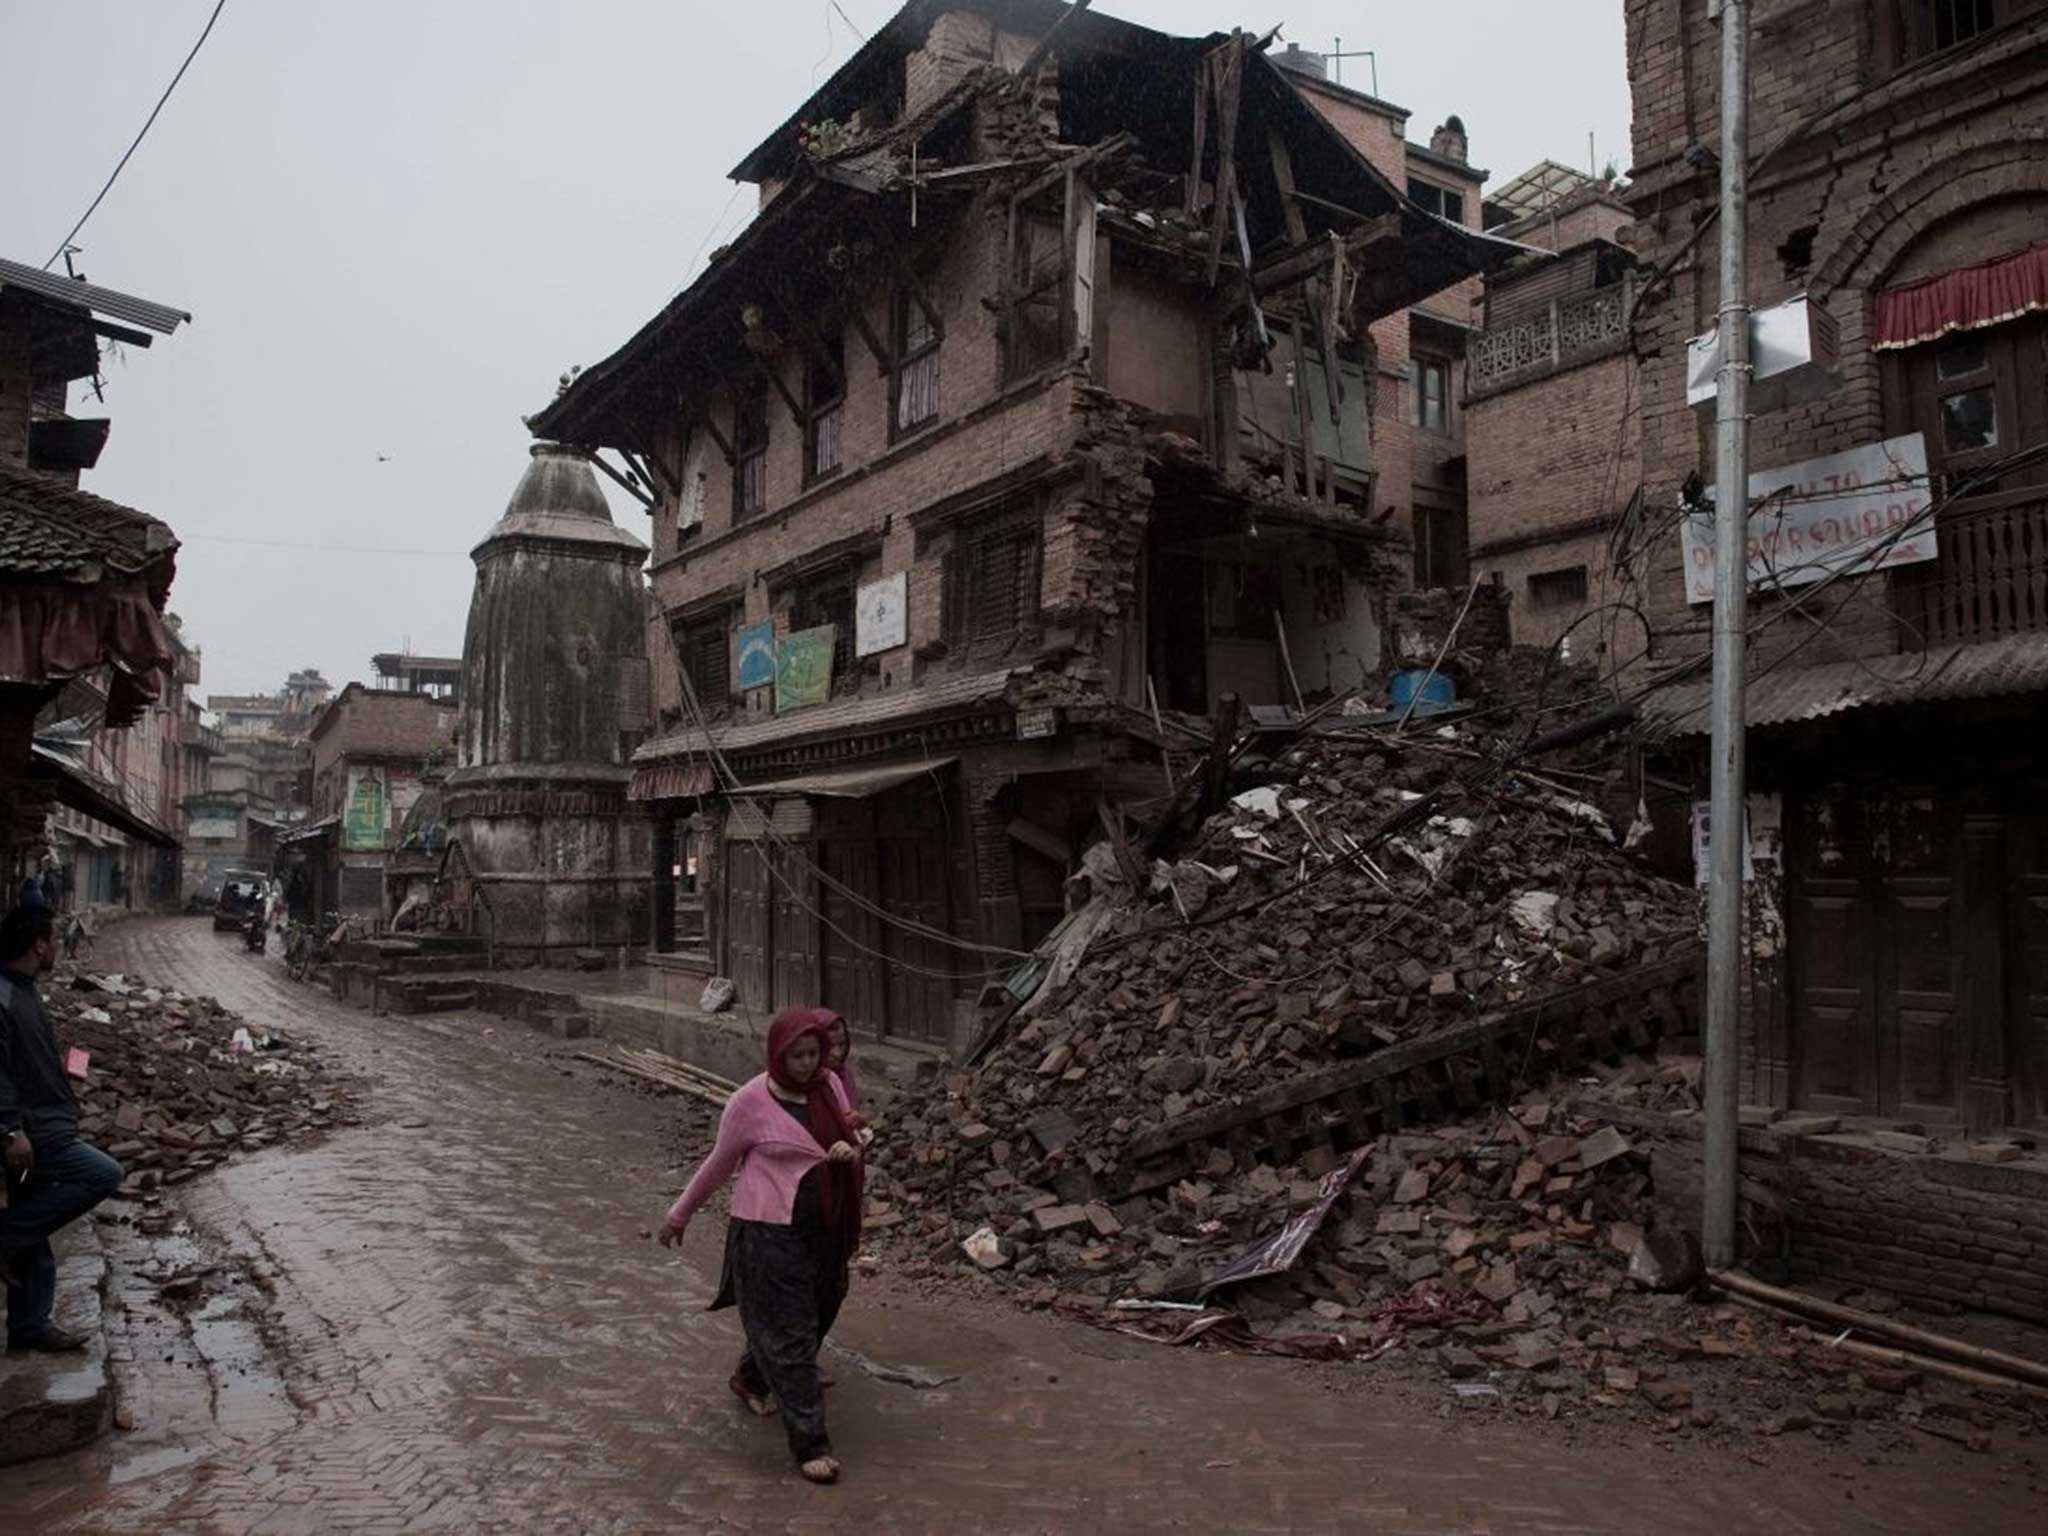 A Nepalese woman walks past the ruins of a home in Kathmandu